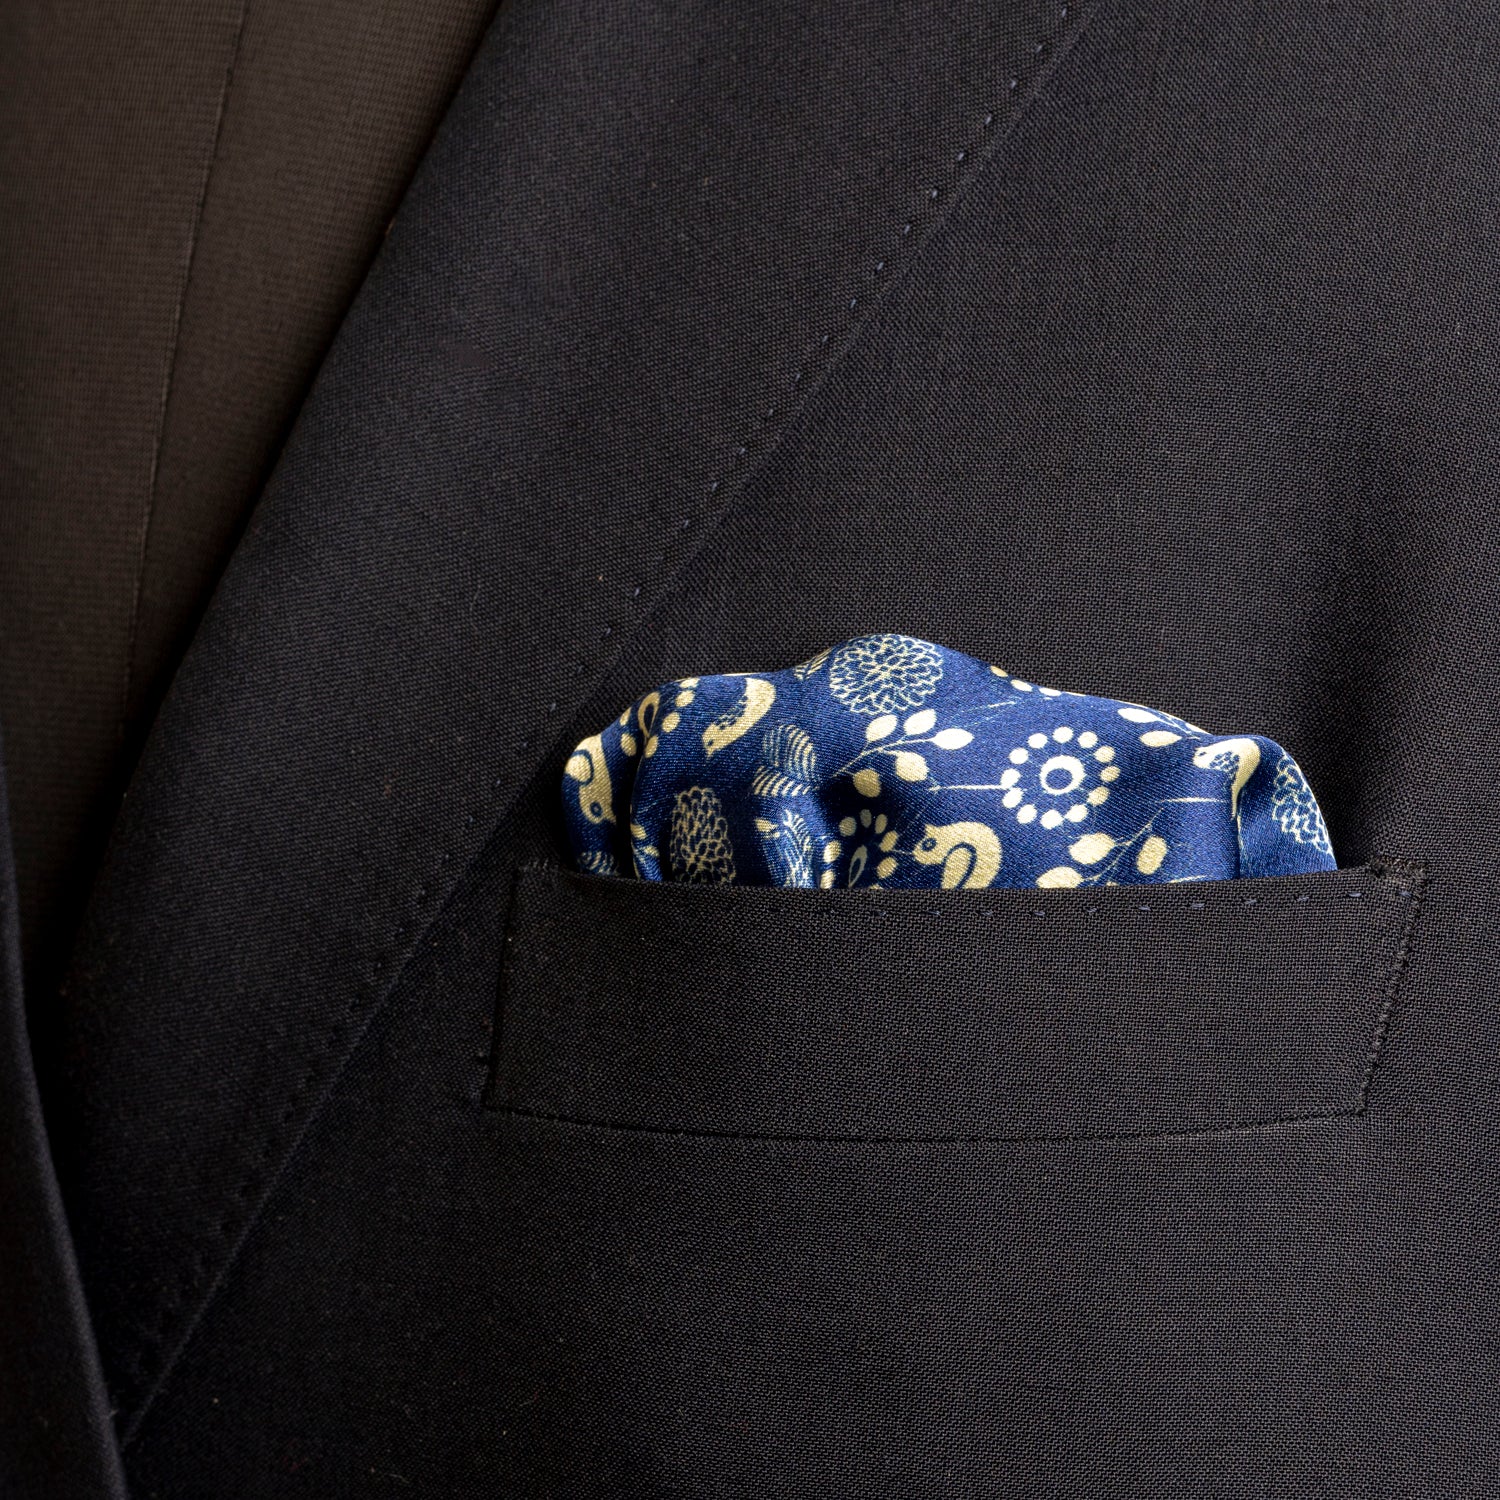 Chokore Blue and white Satin Silk pocket square from the Wildlife Collection